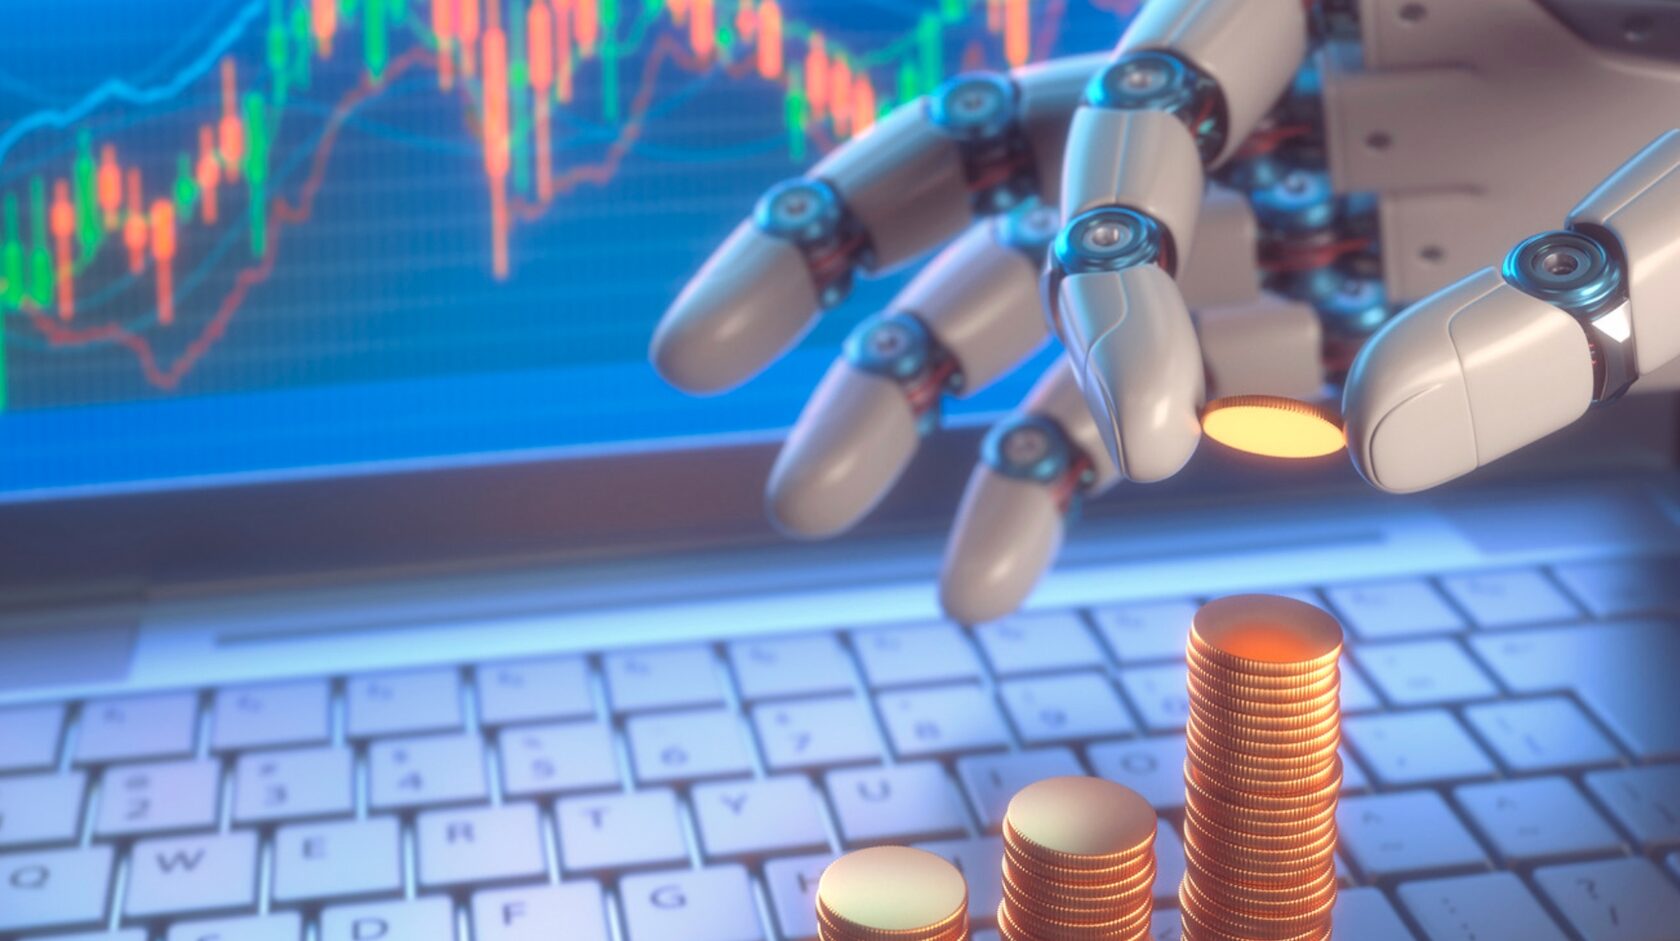 Options trading bot: Robotic hand stacking coins in front of a screen with Japanese candlesticks